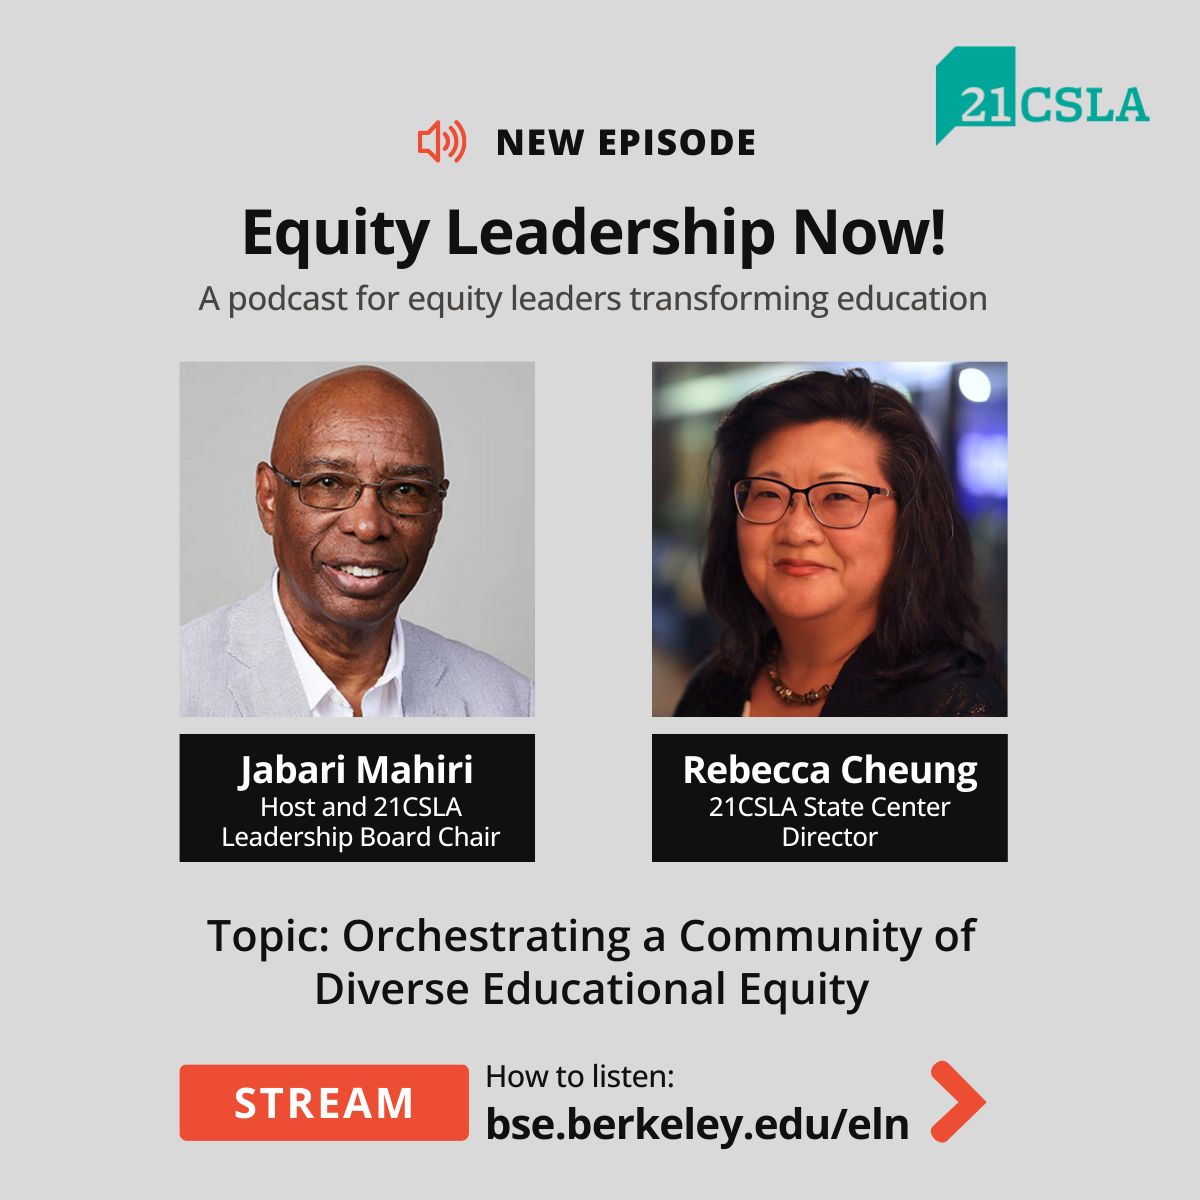 🎙🆕Episode 2 of the #EquityLeadershipNow! Podcast: @21CSLA Director @RebeccaCheung5 delves into her leadership journey & discusses the crucial intersection of #LeadingForEquity & public education with Prof. & 21CSLA Chair @Jmahiri1 bse.berkeley.edu/equity-leaders… #21CSLA #EquityLeaders